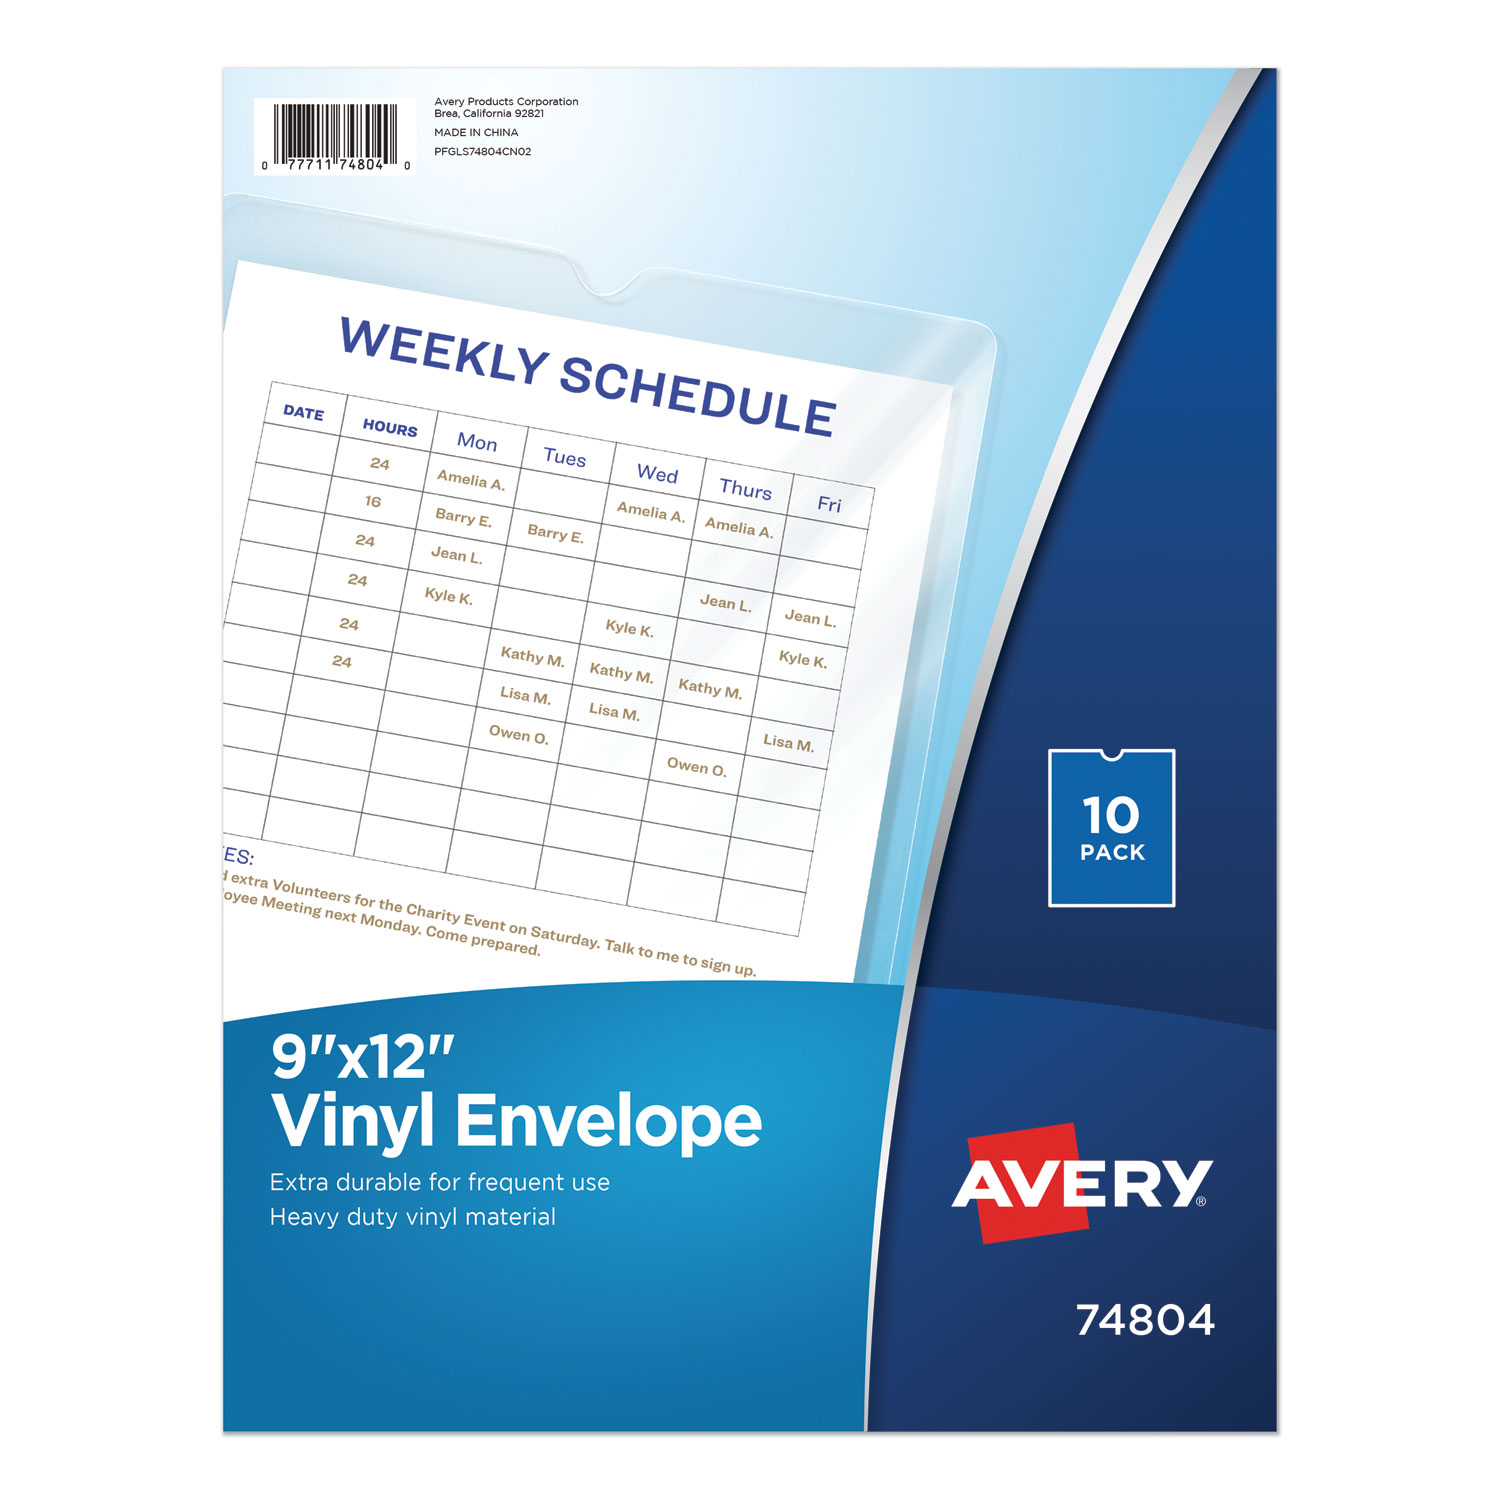  Avery 74804 Top-Load Clear Vinyl Envelopes w/Thumb Notch, 9” x 12”, Clear, 10/Pack (AVE74804) 